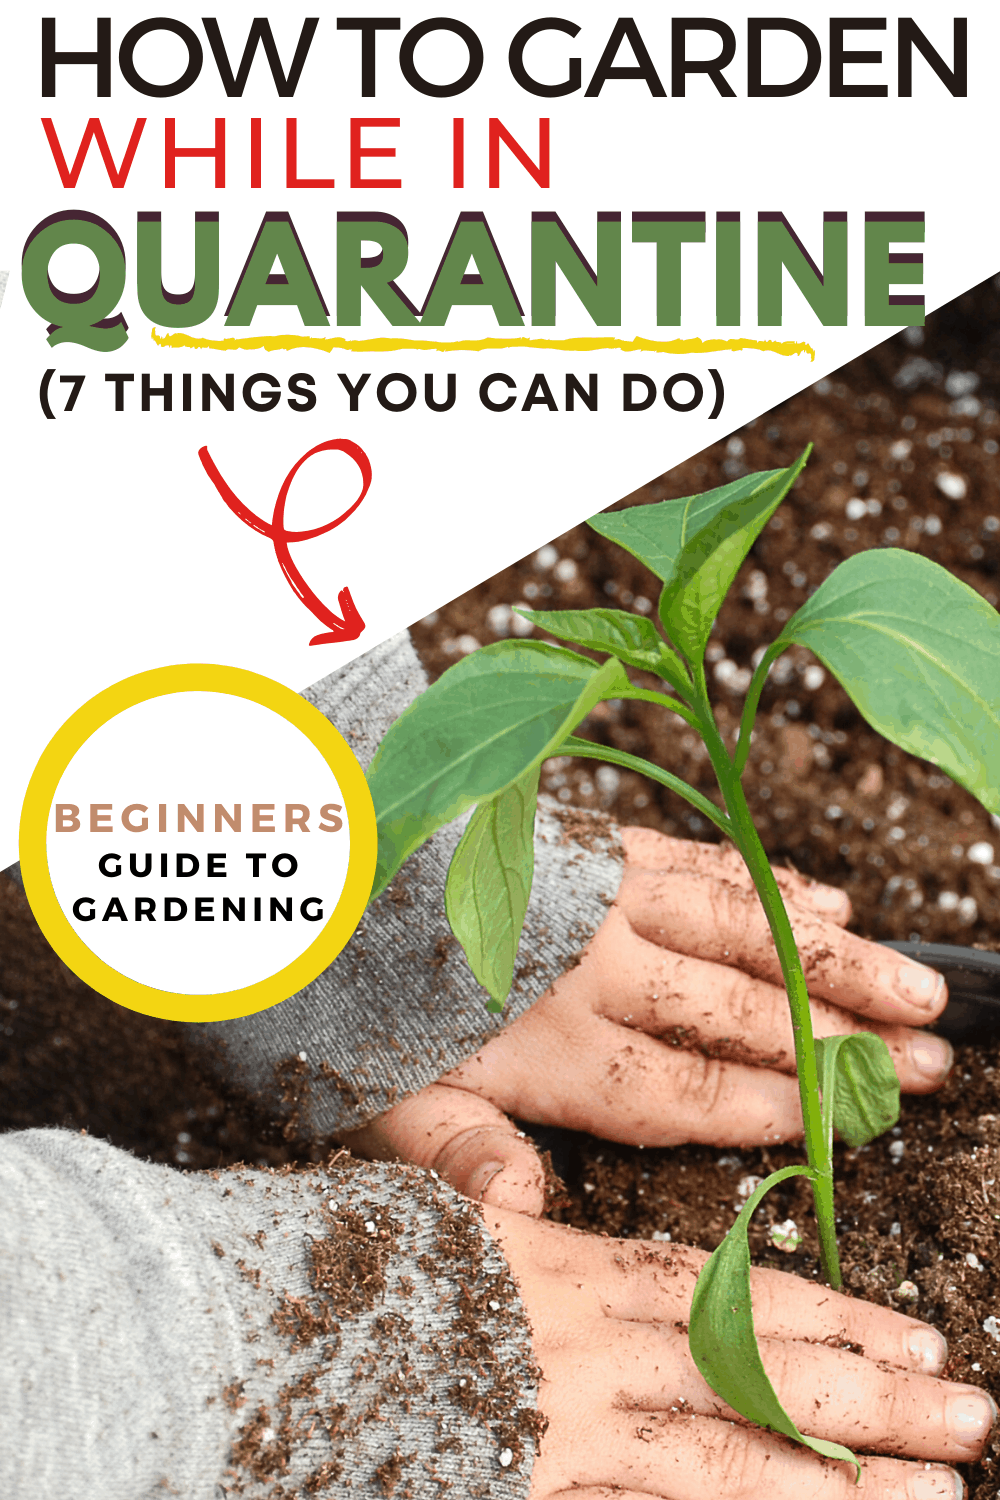 Gardening is not canceled. Gardening and quarantine go hand in hand and the best time to start gardening if you have been thinking about it. via @mystayathome